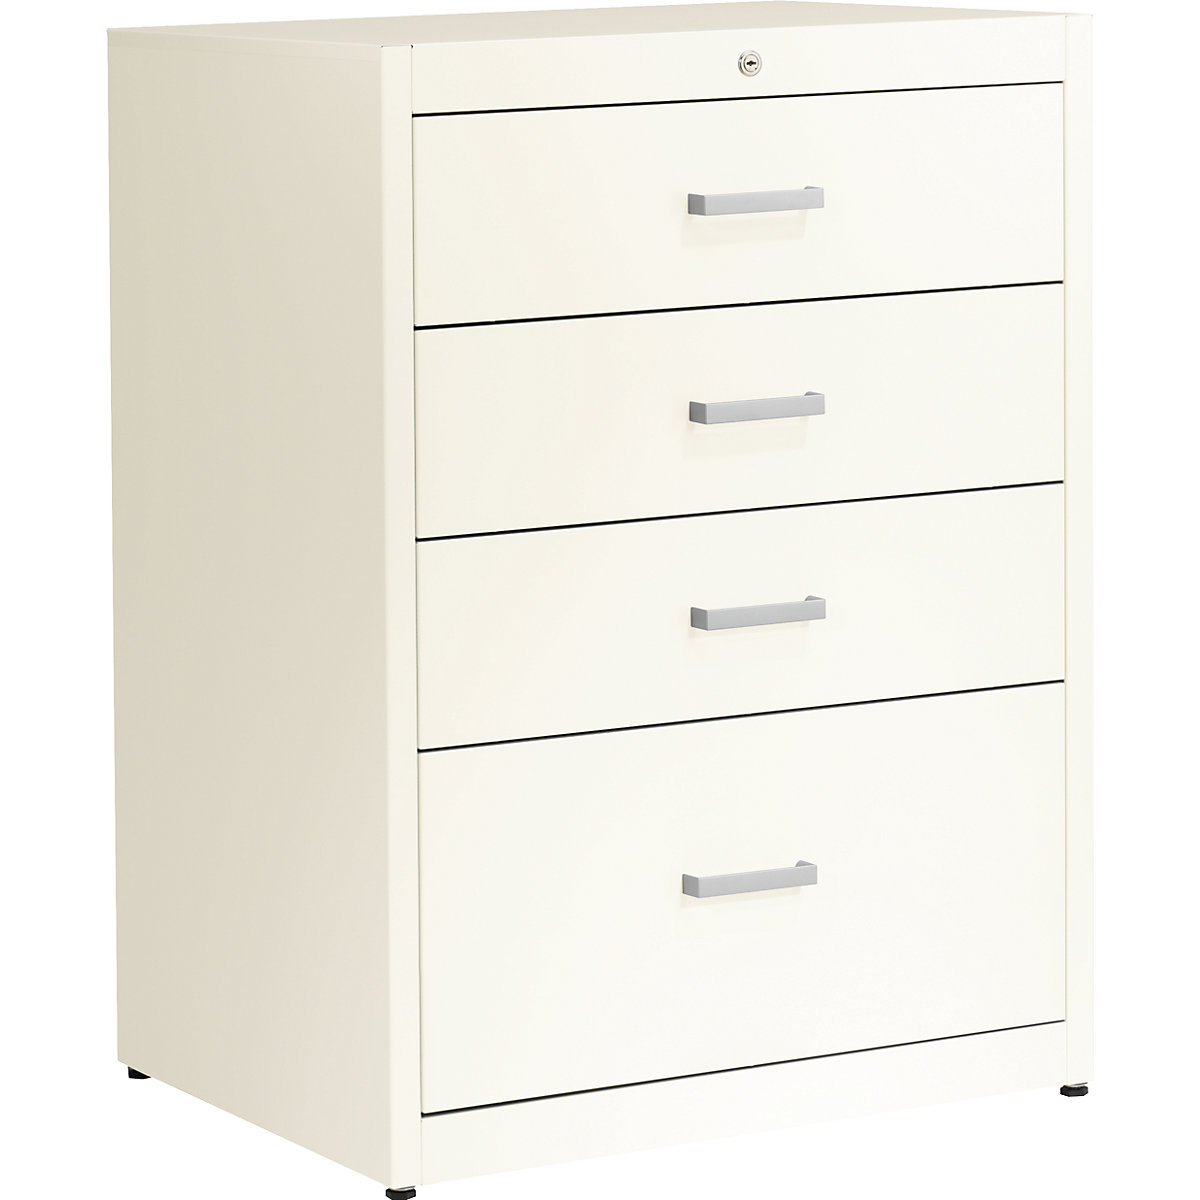 Card file cabinet, bar handles – mauser, 4 drawers, standard retraction mechanism, 3-track, pure white-5